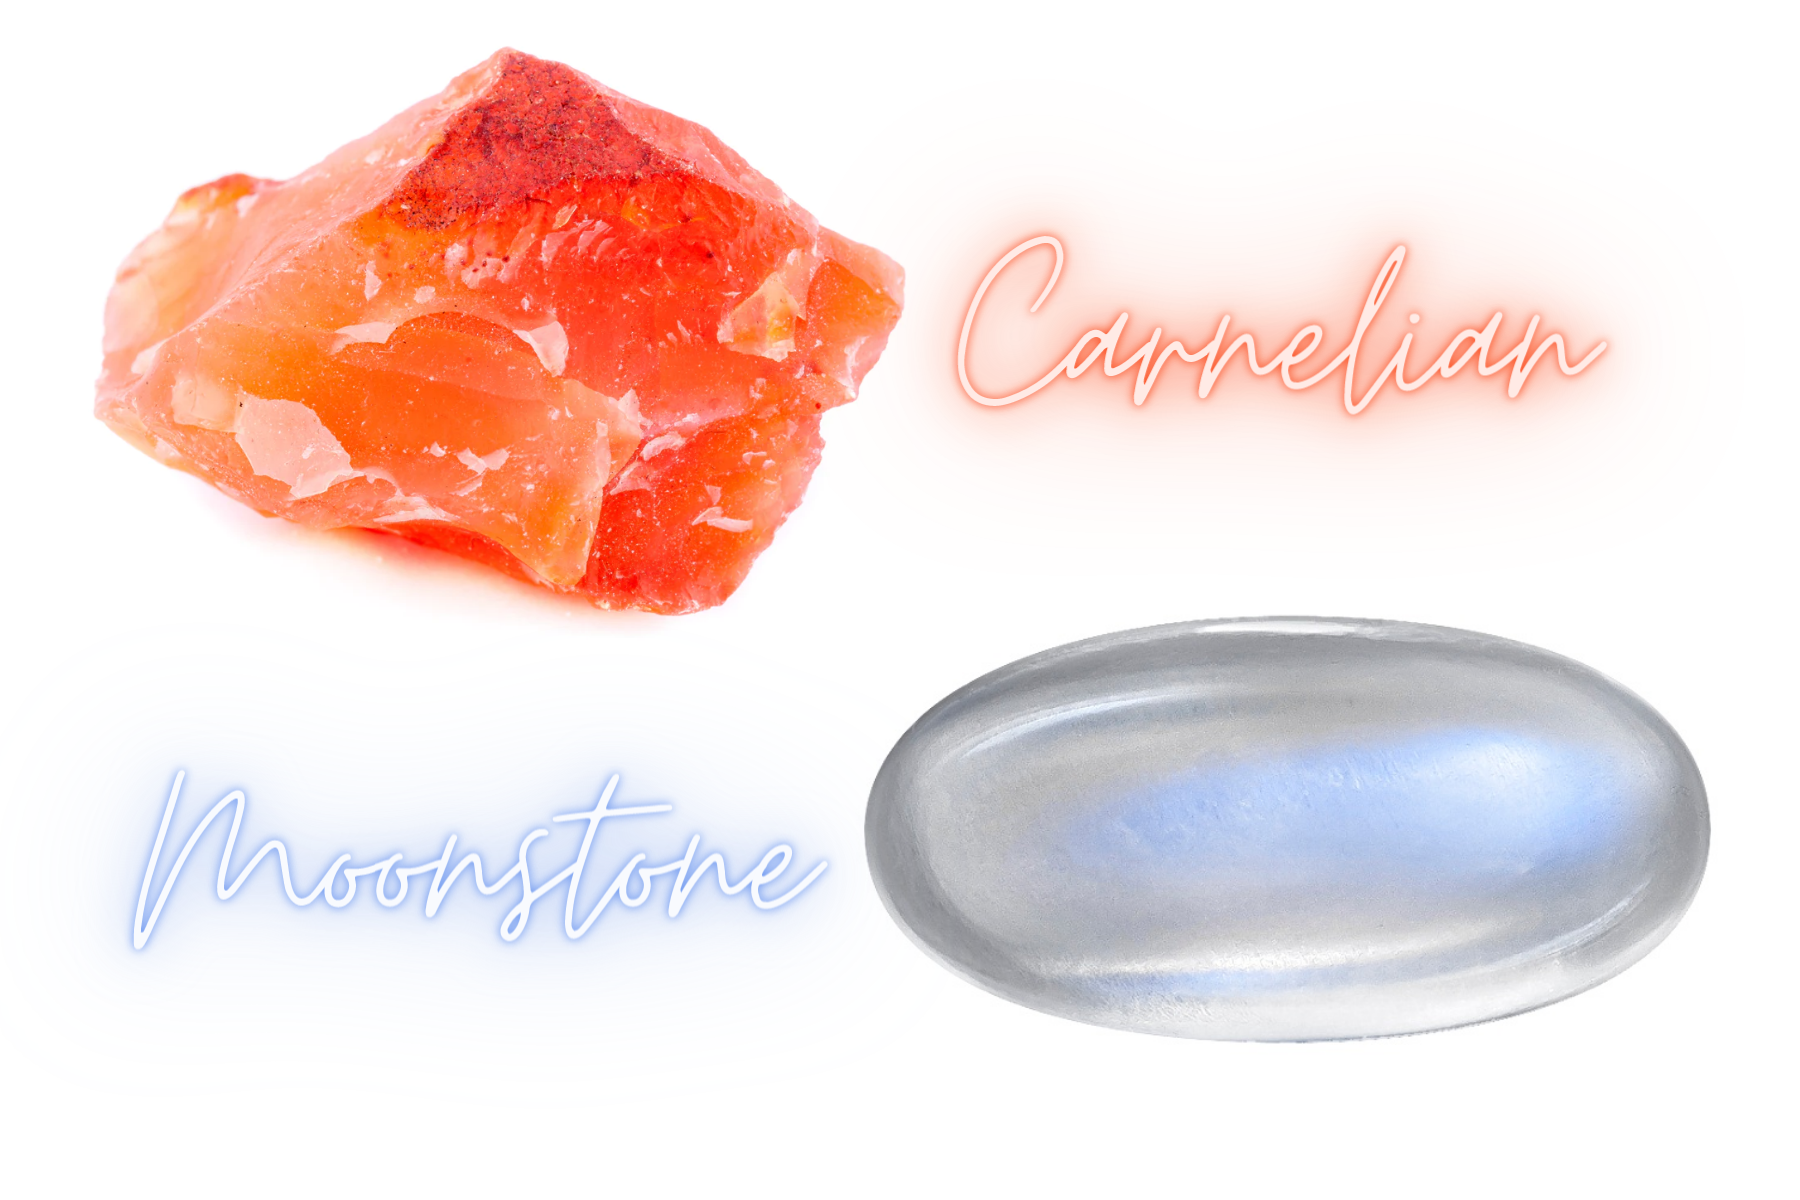 Carnelian and Moonstone crystals